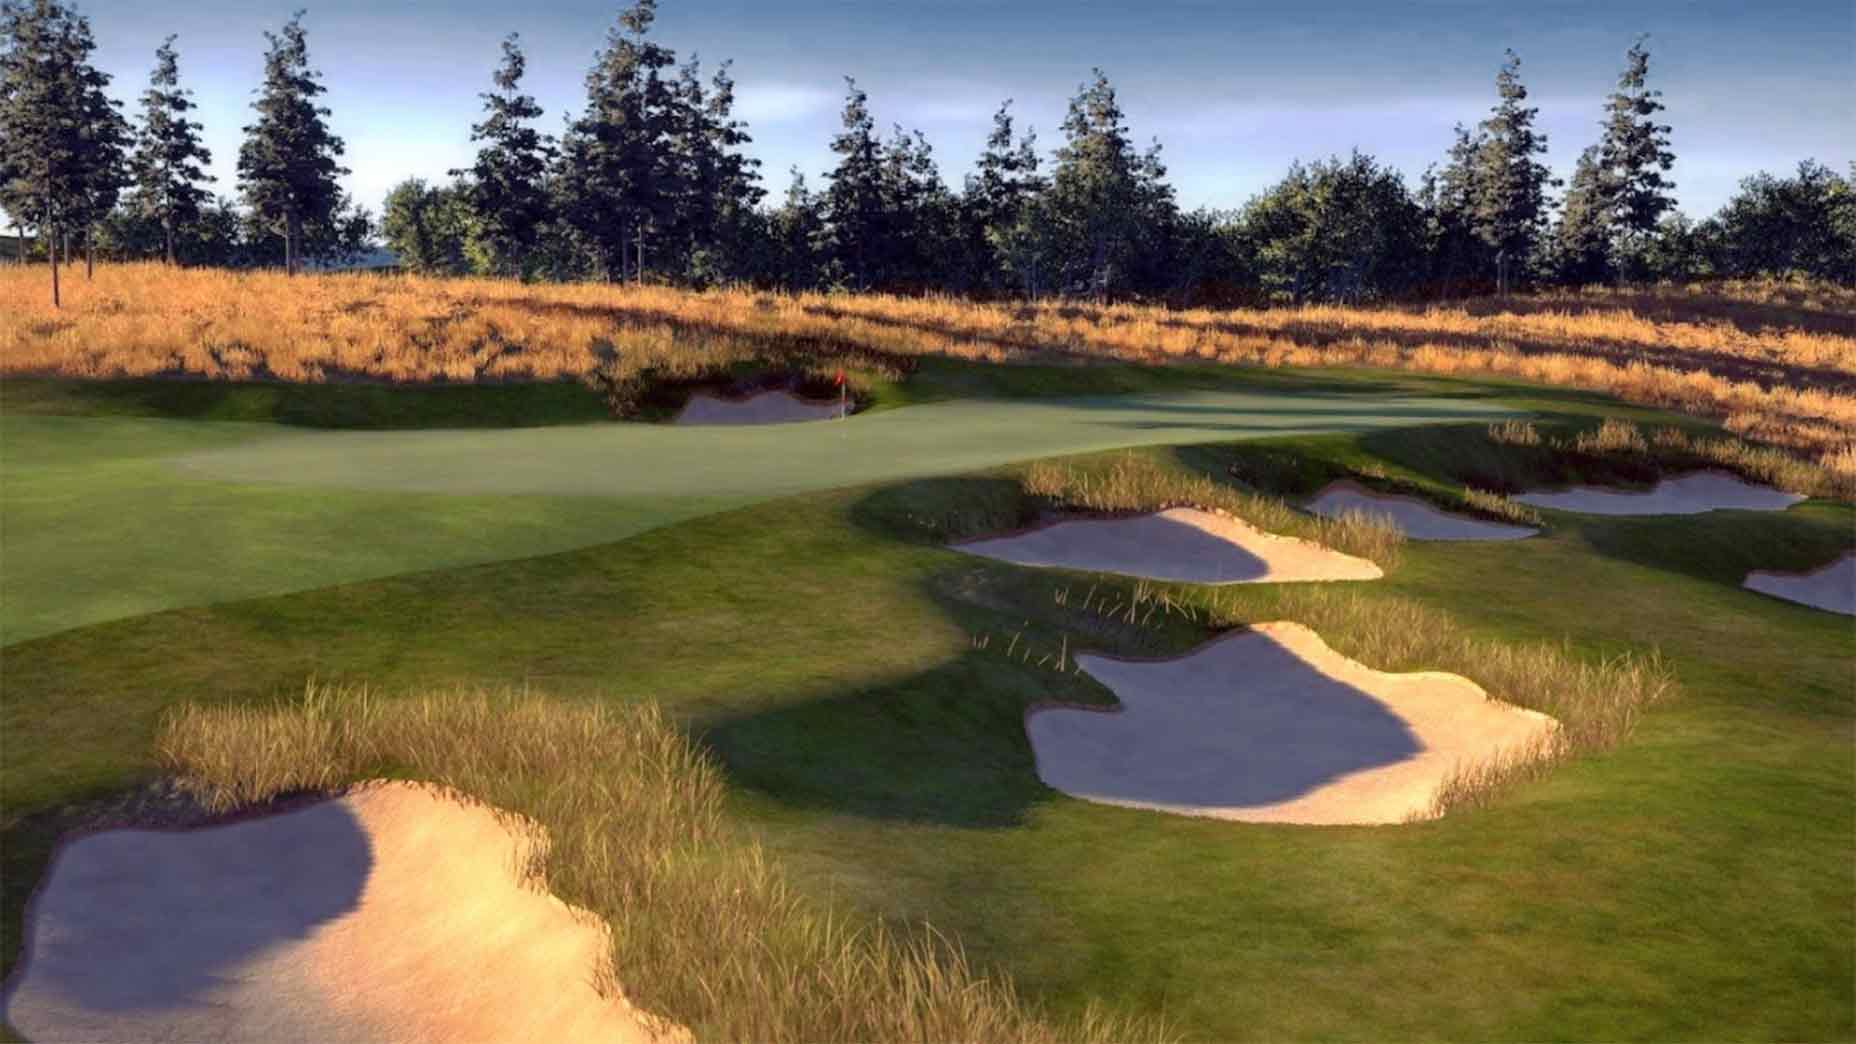 Sand Valley to add Tom Doak design. Here’s what will set it apart